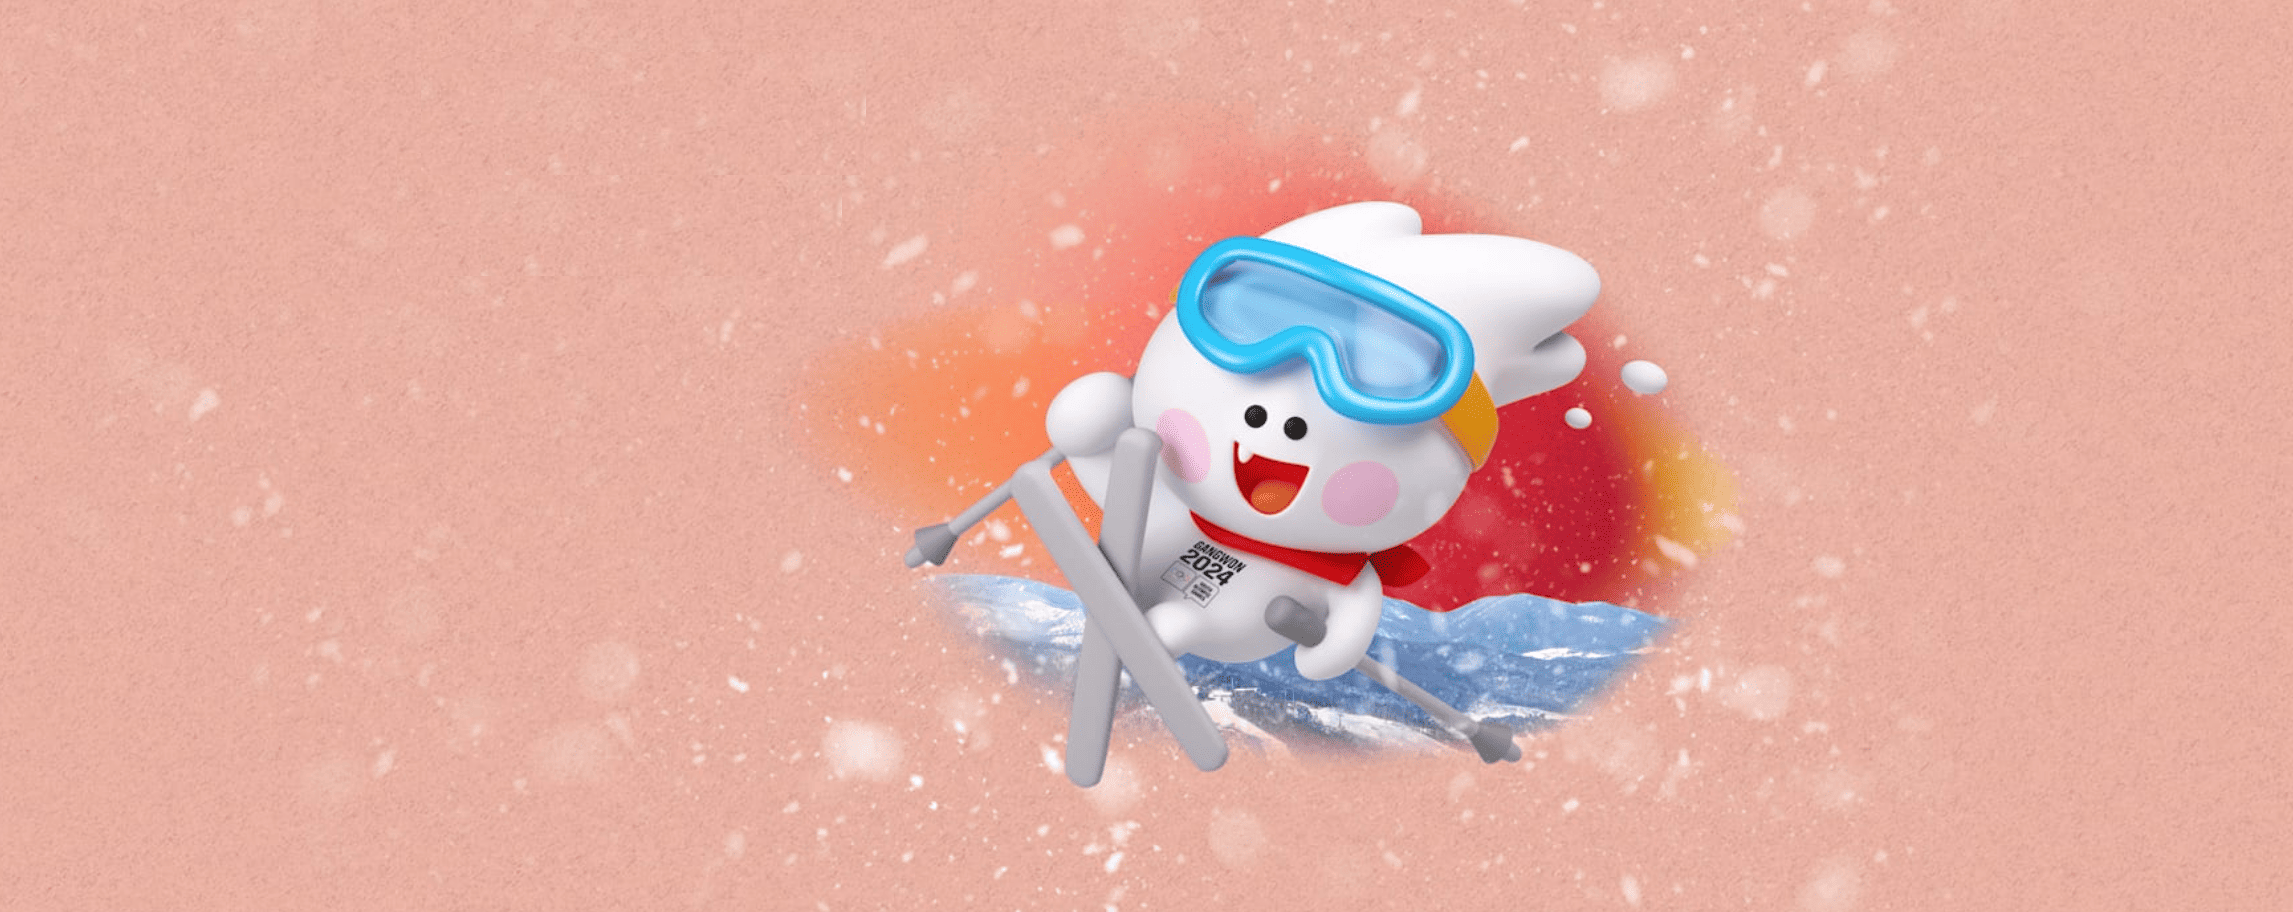 Be a Part of History at the 2024 Gangwon Winter Youth Olympics This